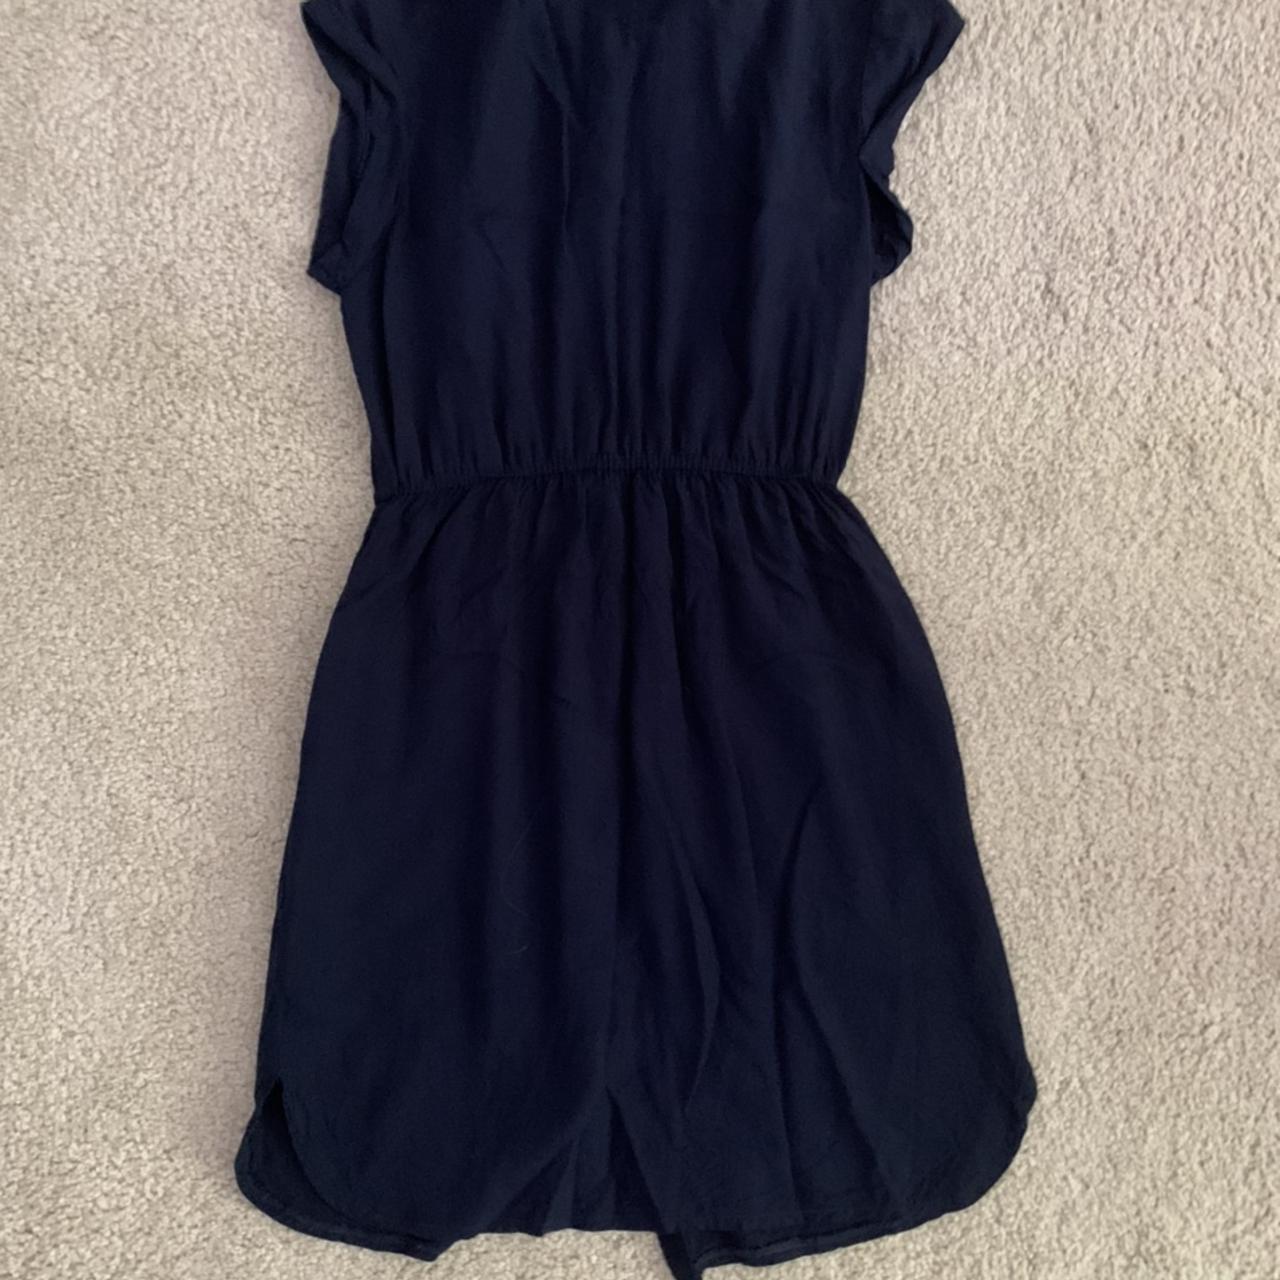 New Look Women's Blue and Navy Dress (4)